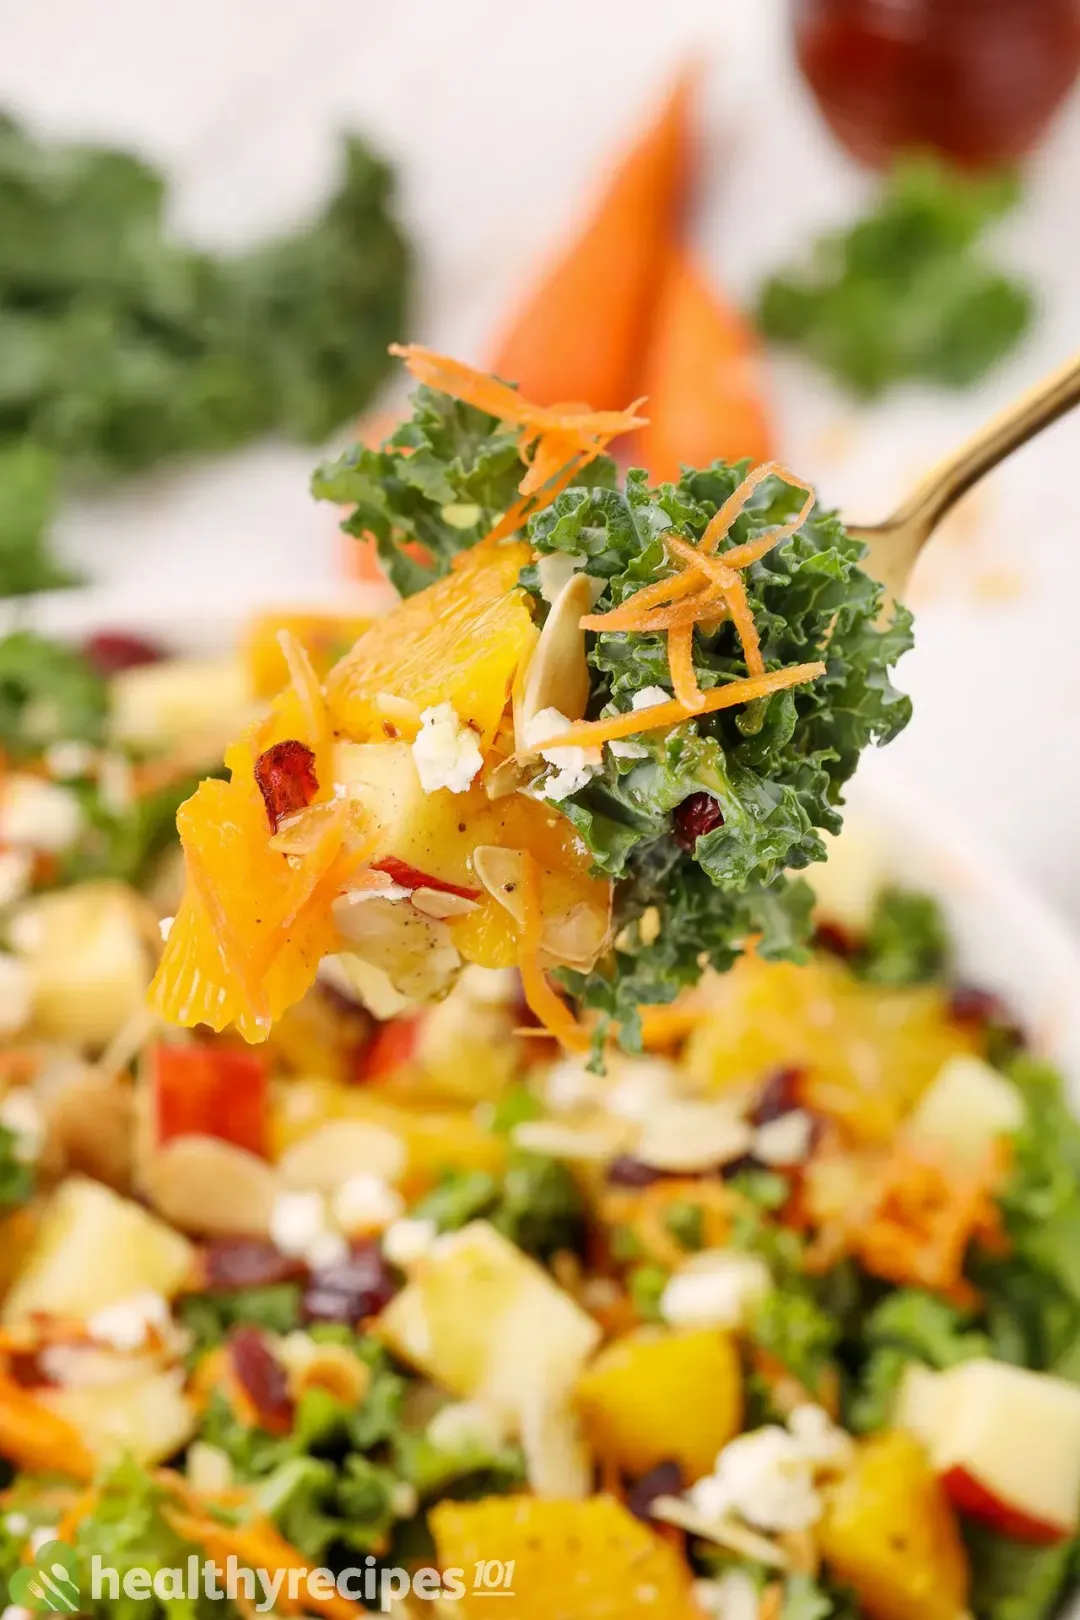 how to prepare kale for kale salad